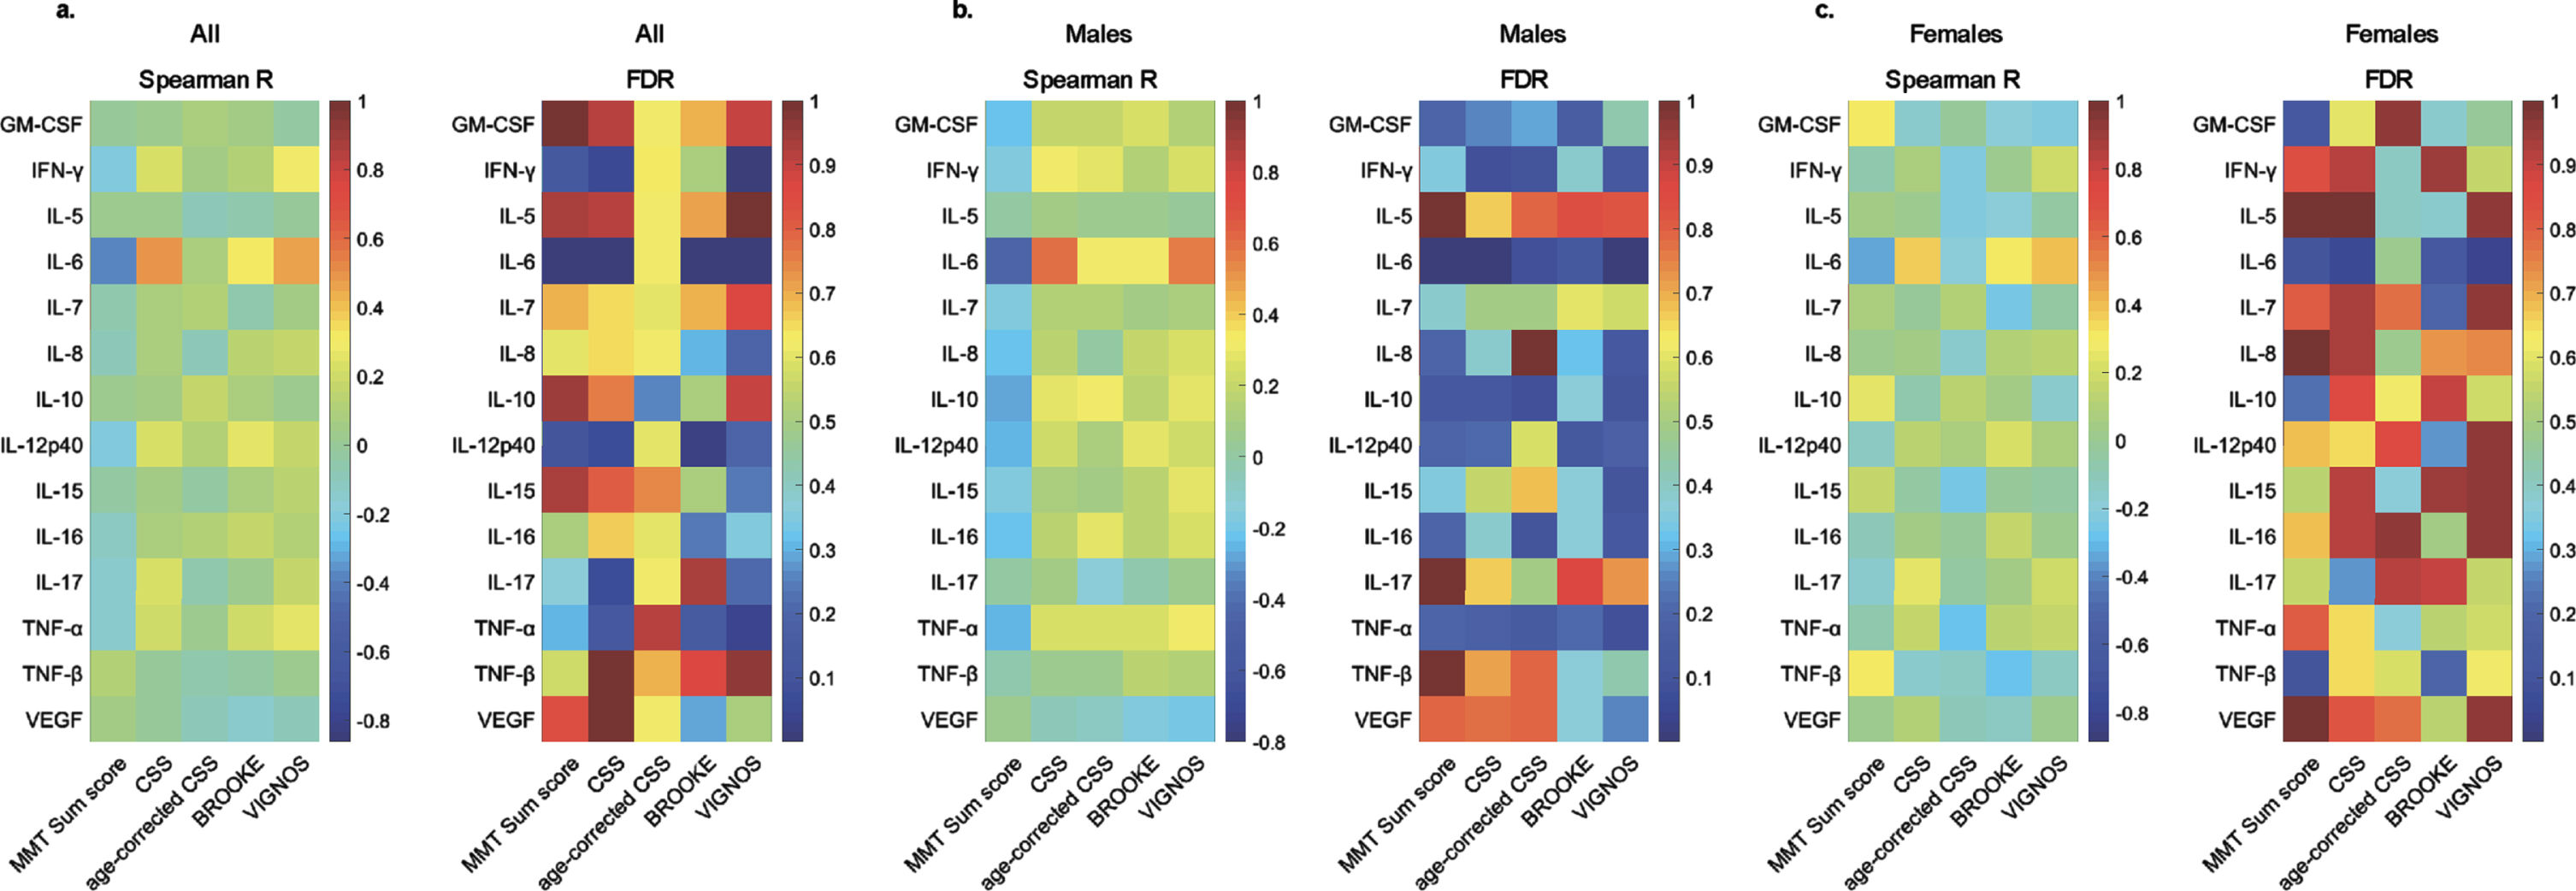 Correlations between serum cytokine levels and clinical scores in FSHD1. Heat maps of Spearman’s correlation coefficient (Spearman R) and False Discovery Rate (FDR) using Benjamini and Hochberg method for cytokines and clinical scores in all patients (a.), males (b.), and females (c.).